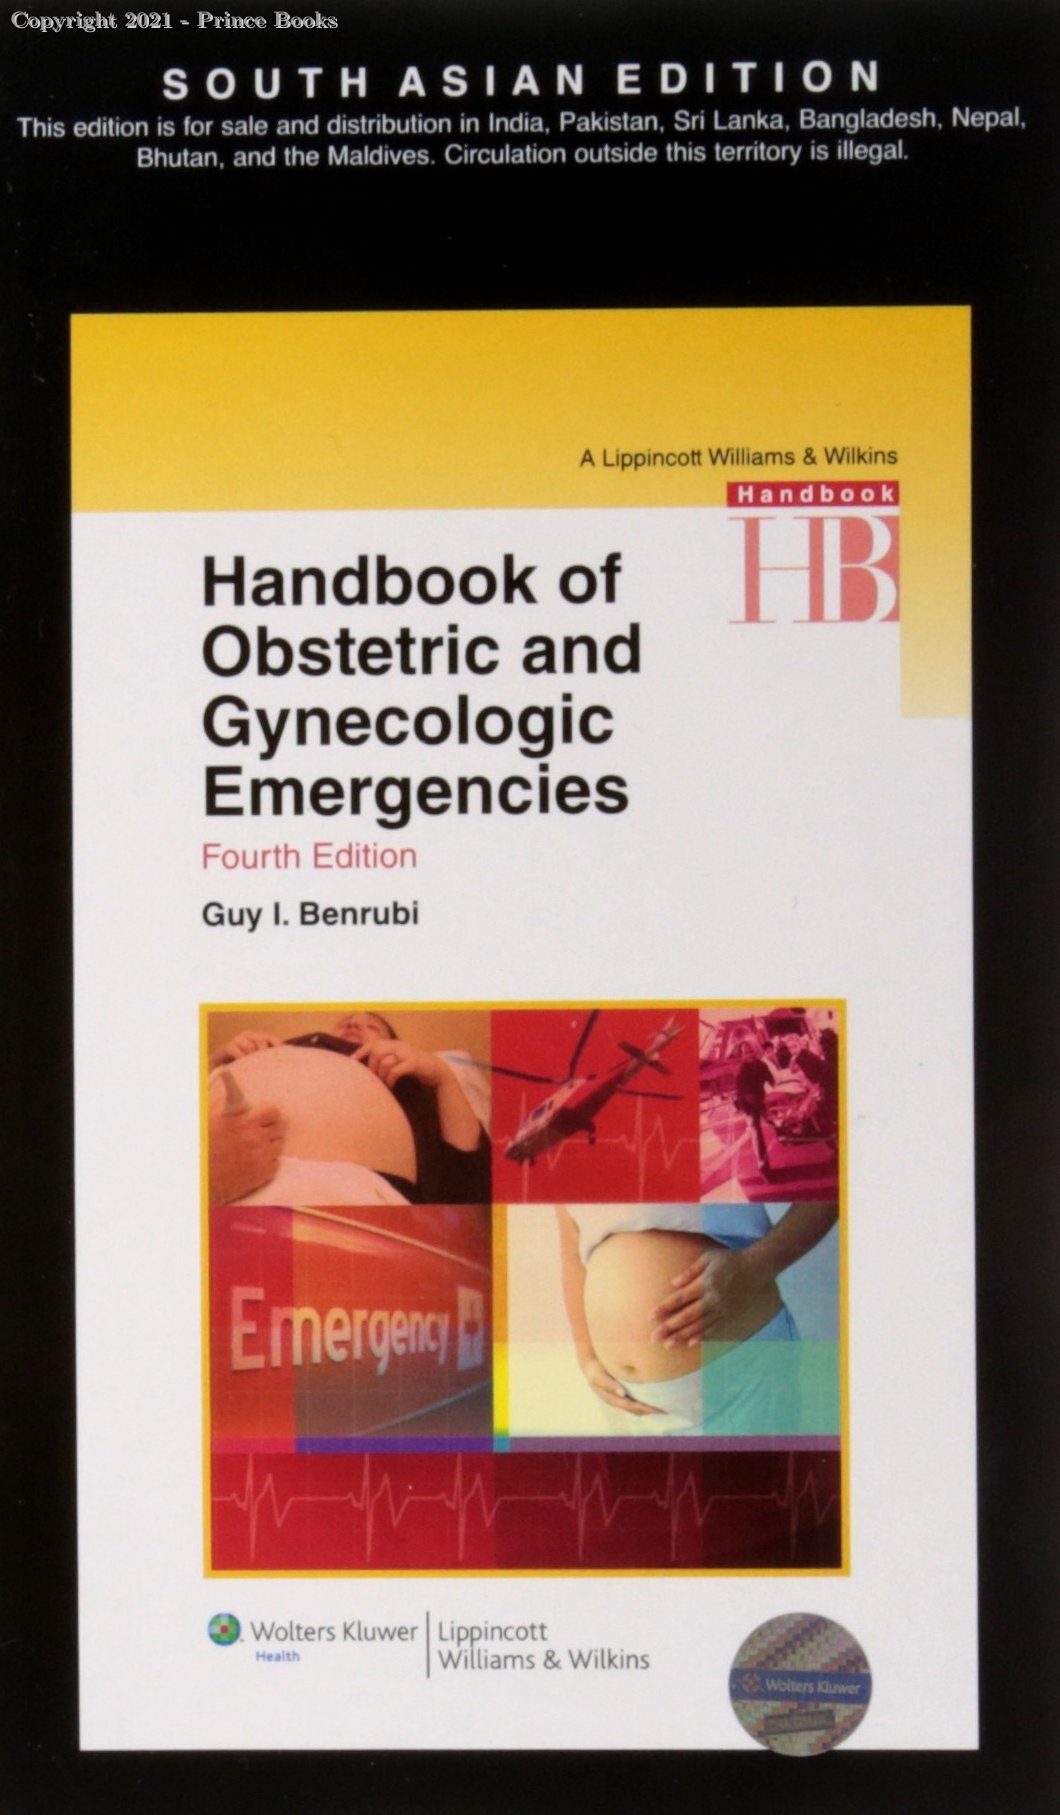 Handbook of Obstetric and Gynecologic Emergencies, 4e